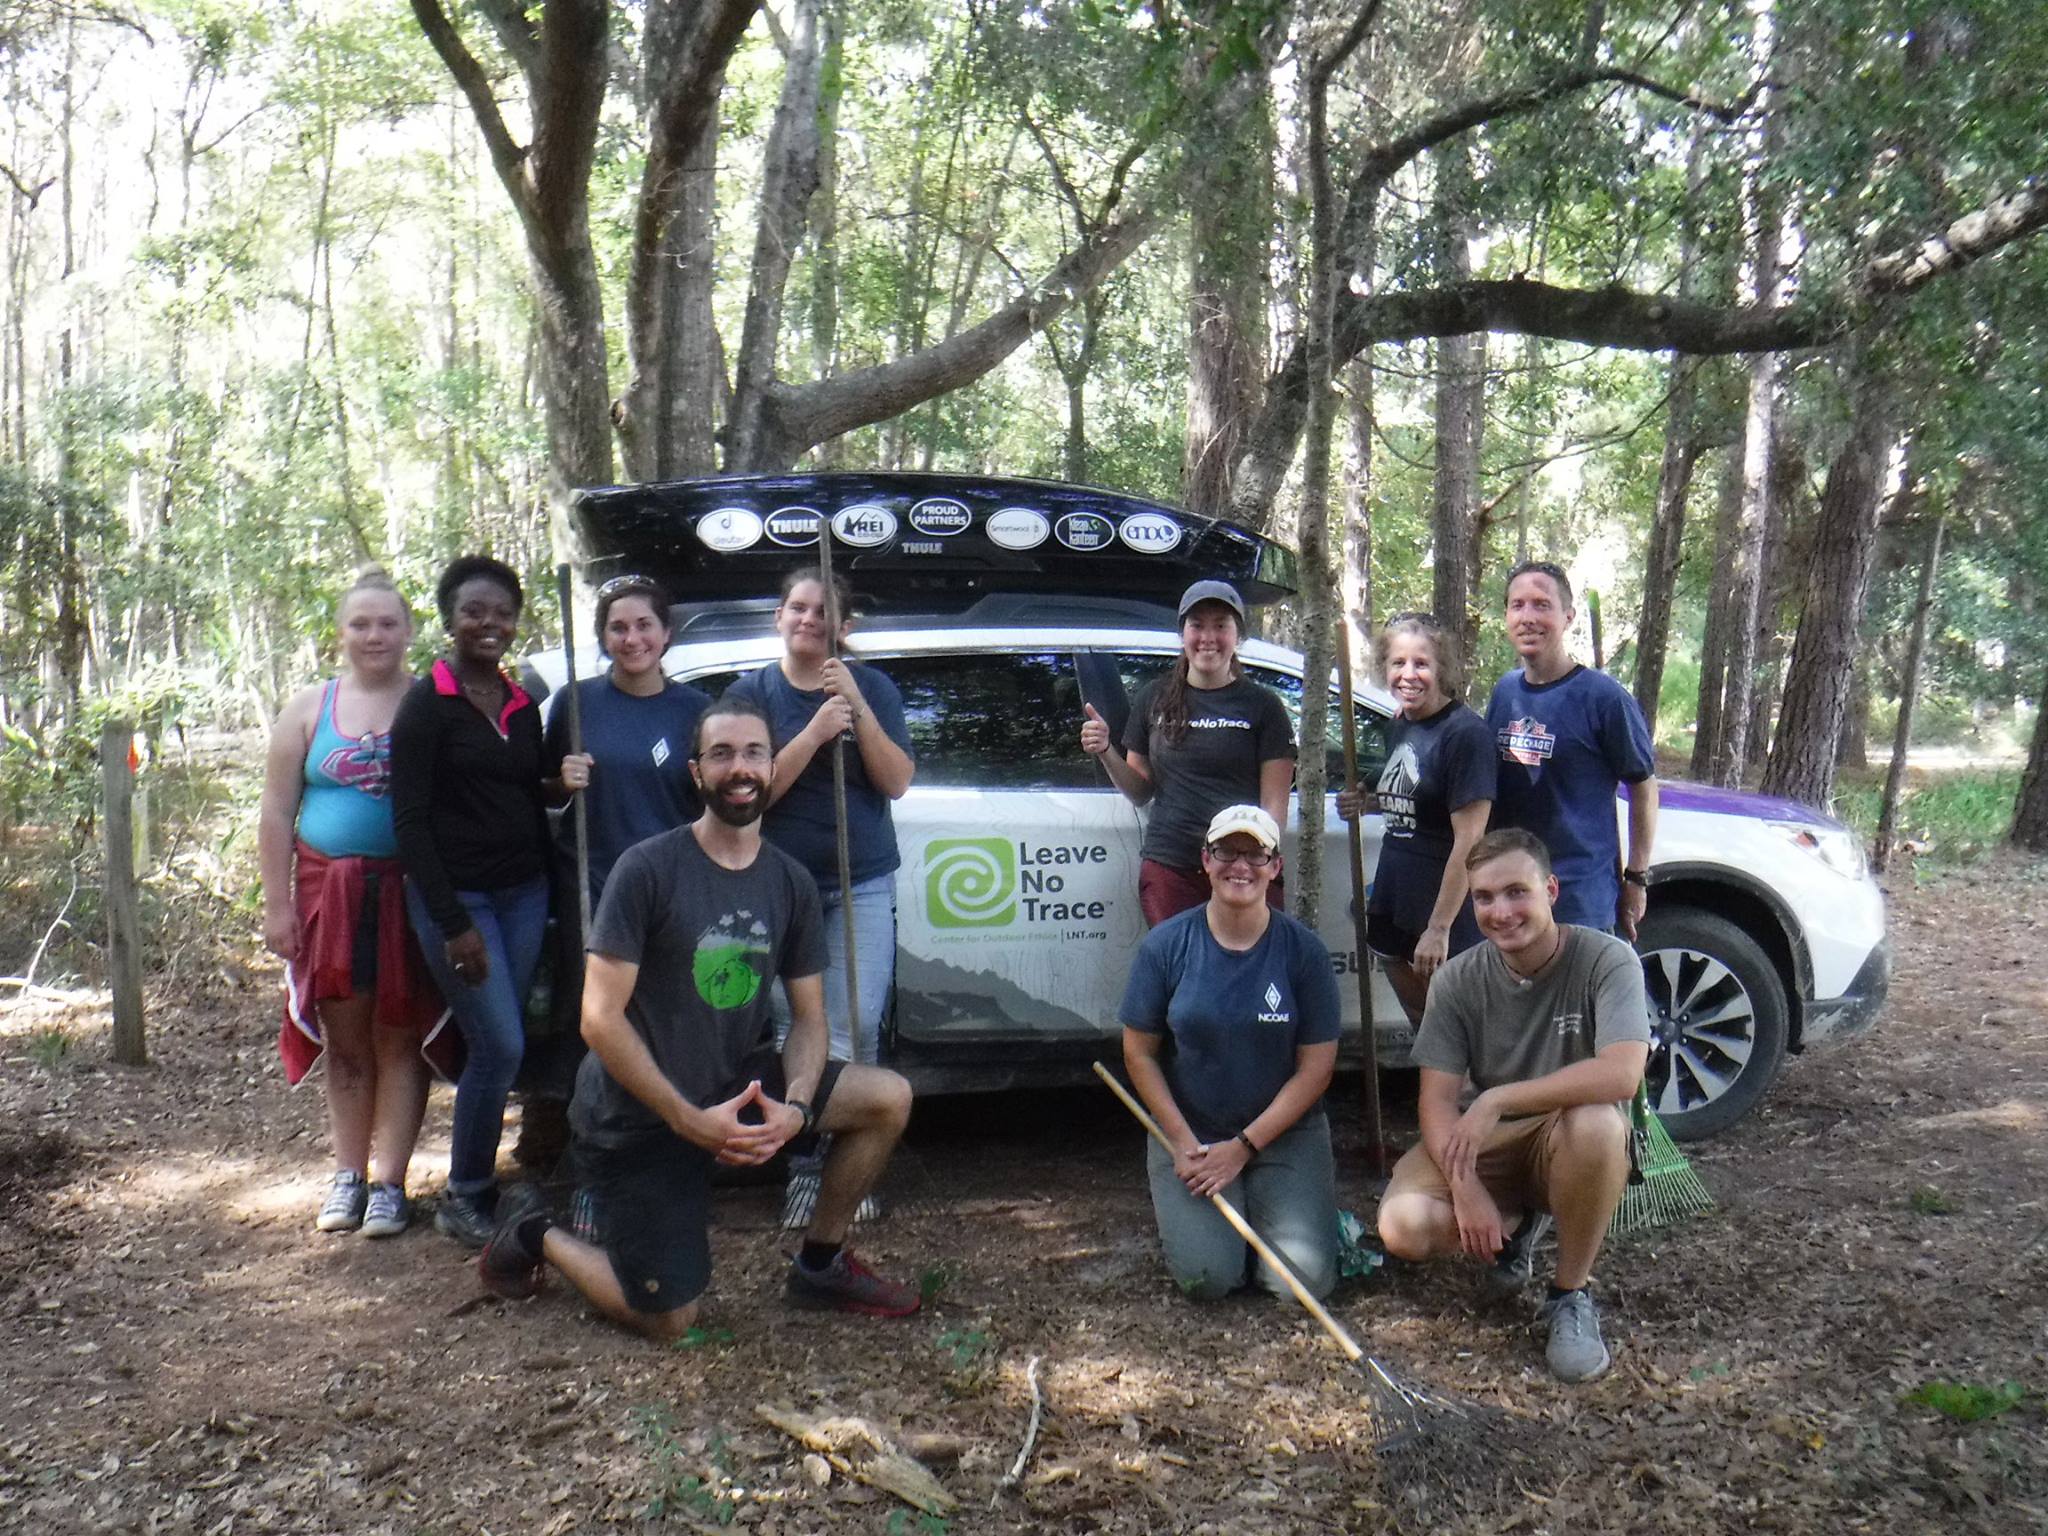 A group of people posing in front of a car in the woods.